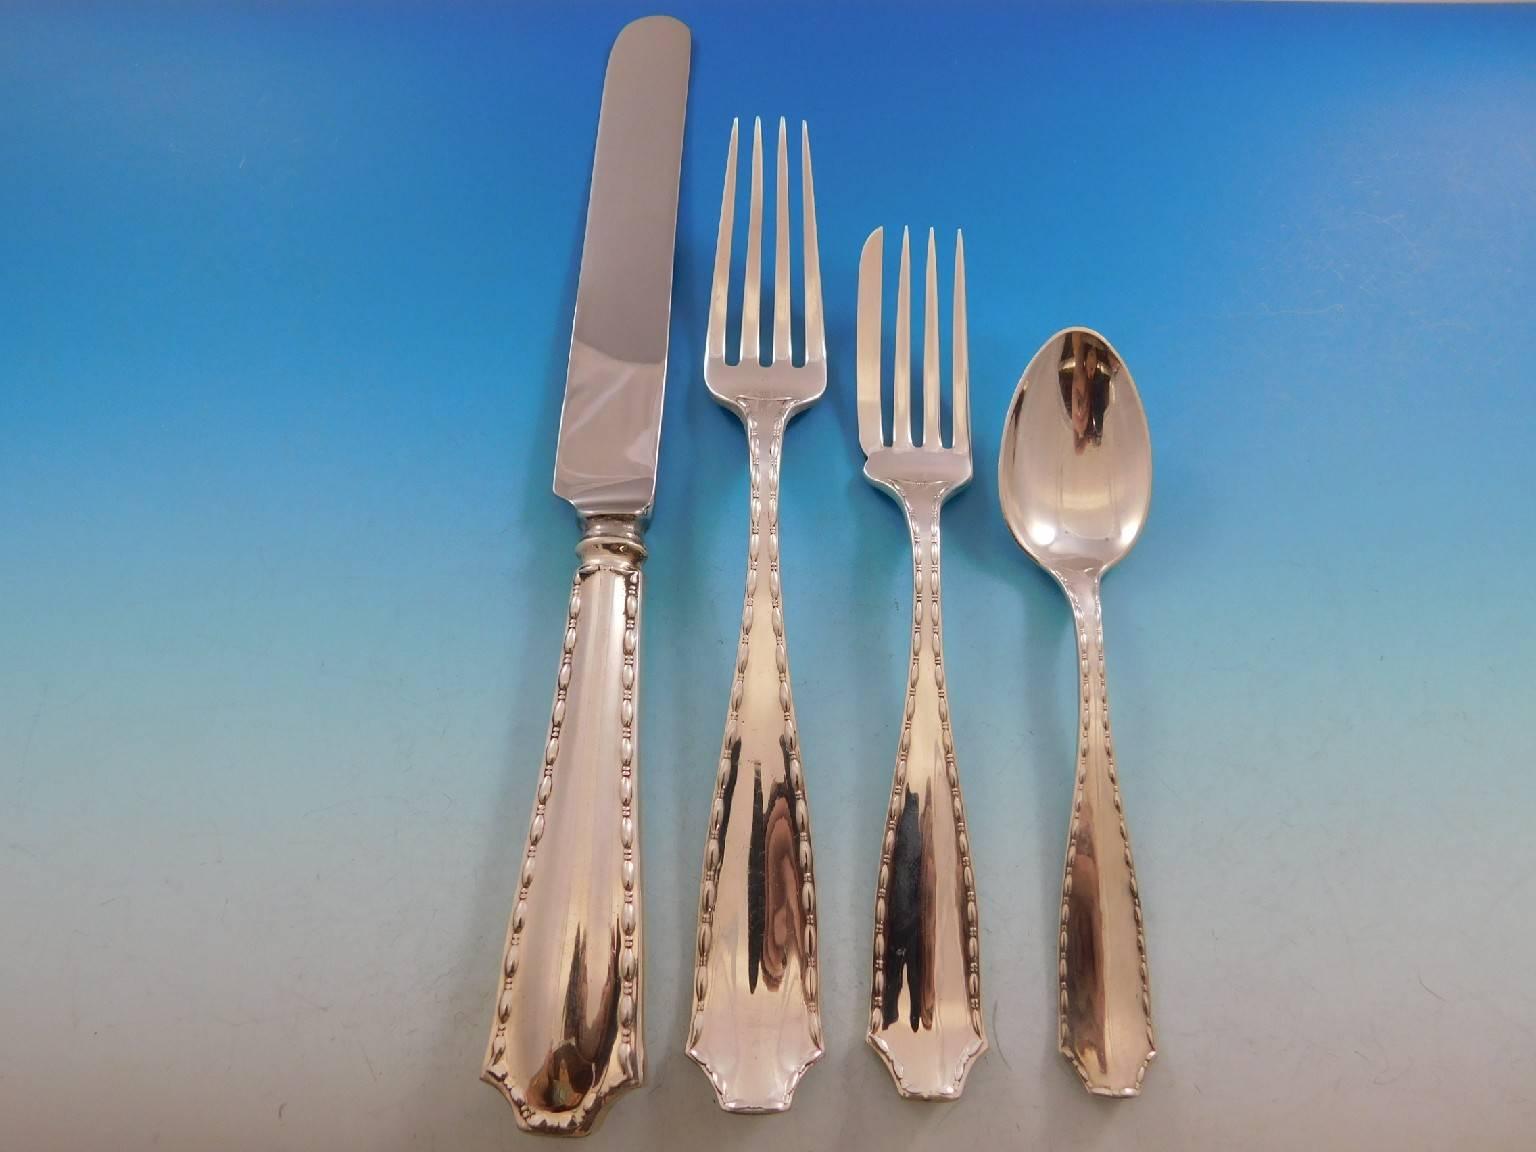 Beautiful marquise by Tiffany & Co. Sterling silver dinner size flatware set, 84 pieces. This set includes:

12 dinner size knives, 10 1/4